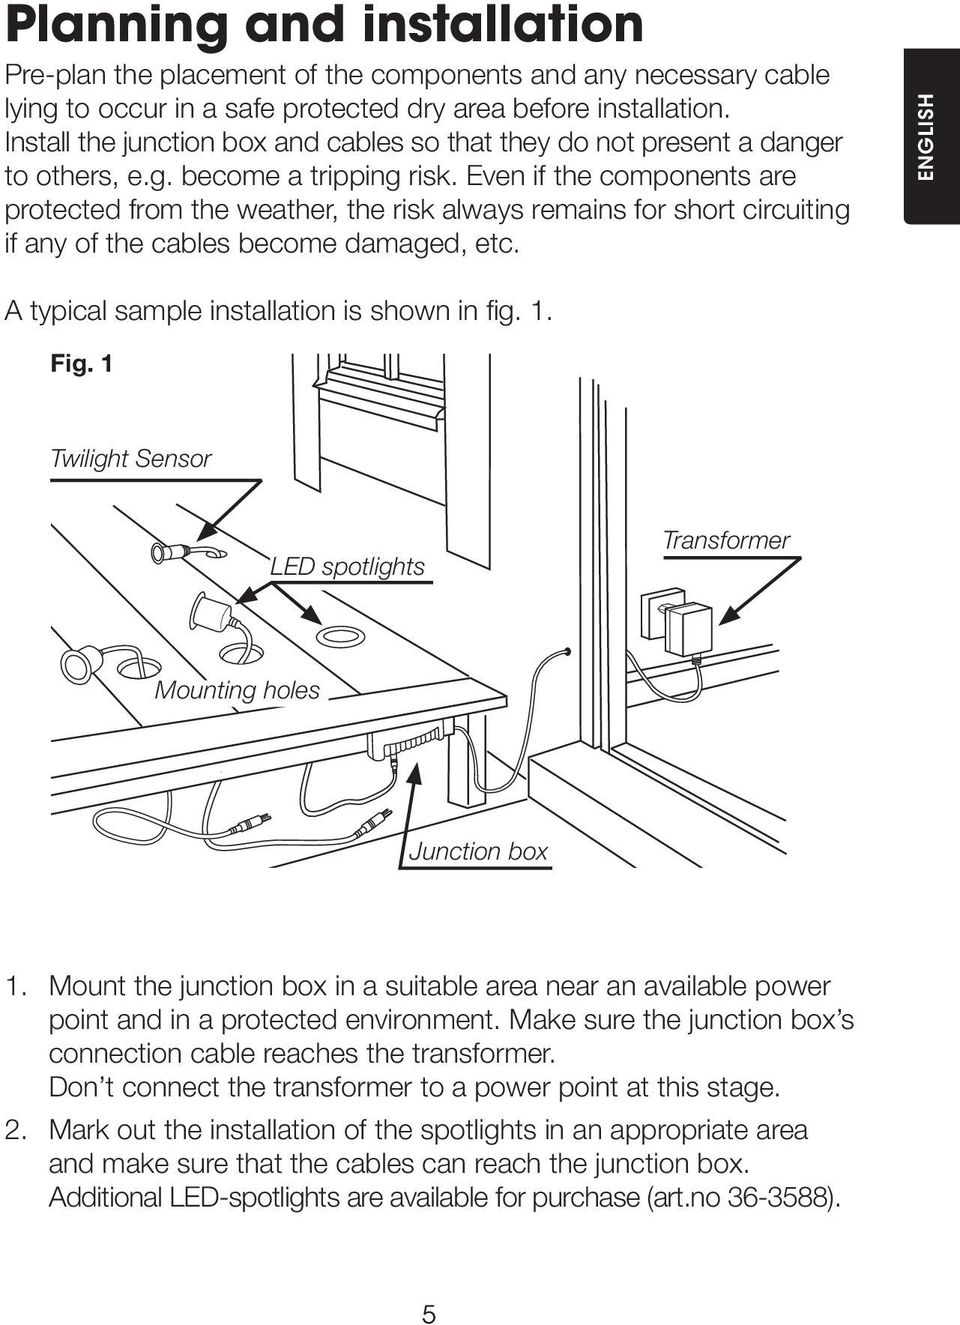 Even if the components are protected from the weather, the risk always remains for short circuiting if any of the cables become damaged, etc. ENGLISH A typical sample installation is shown in fig. 1.